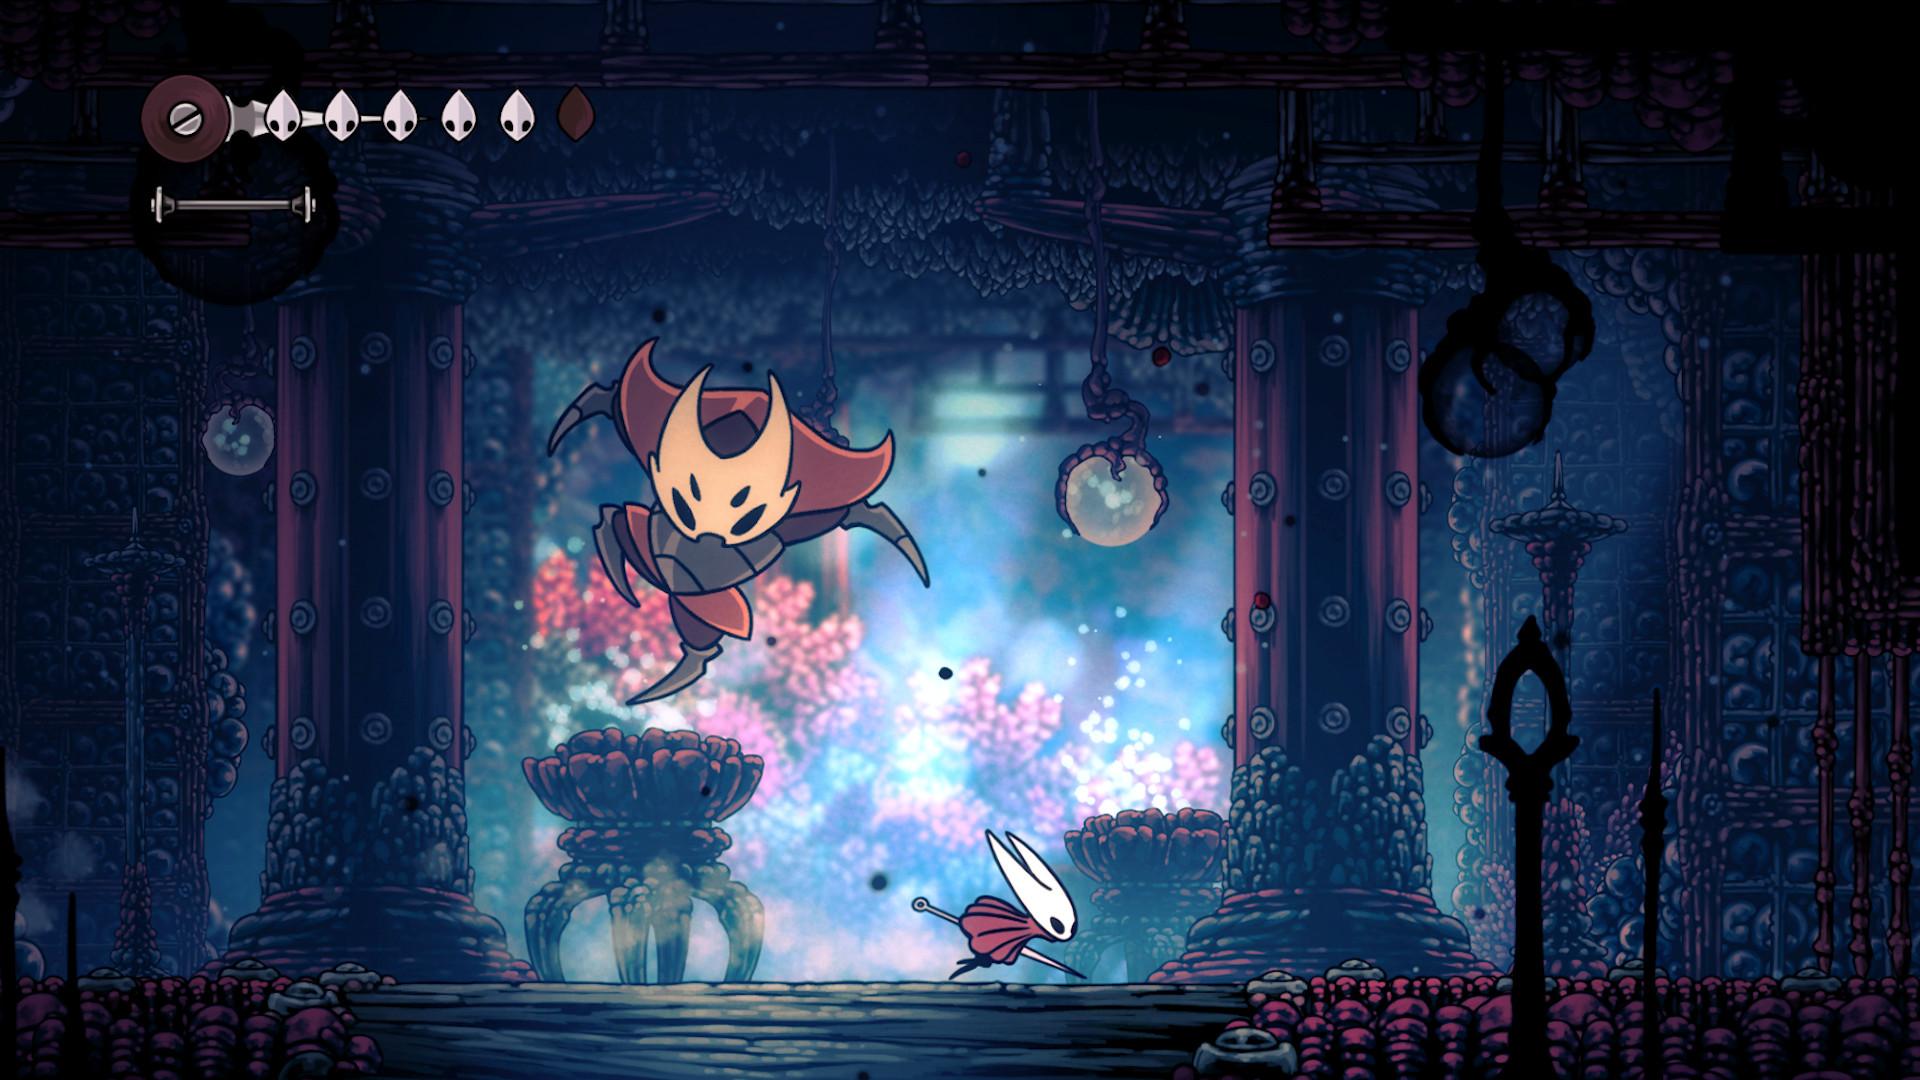 'Hollow Knight: Silksong' Hornet fighting a boss inside a building with floral architecture.